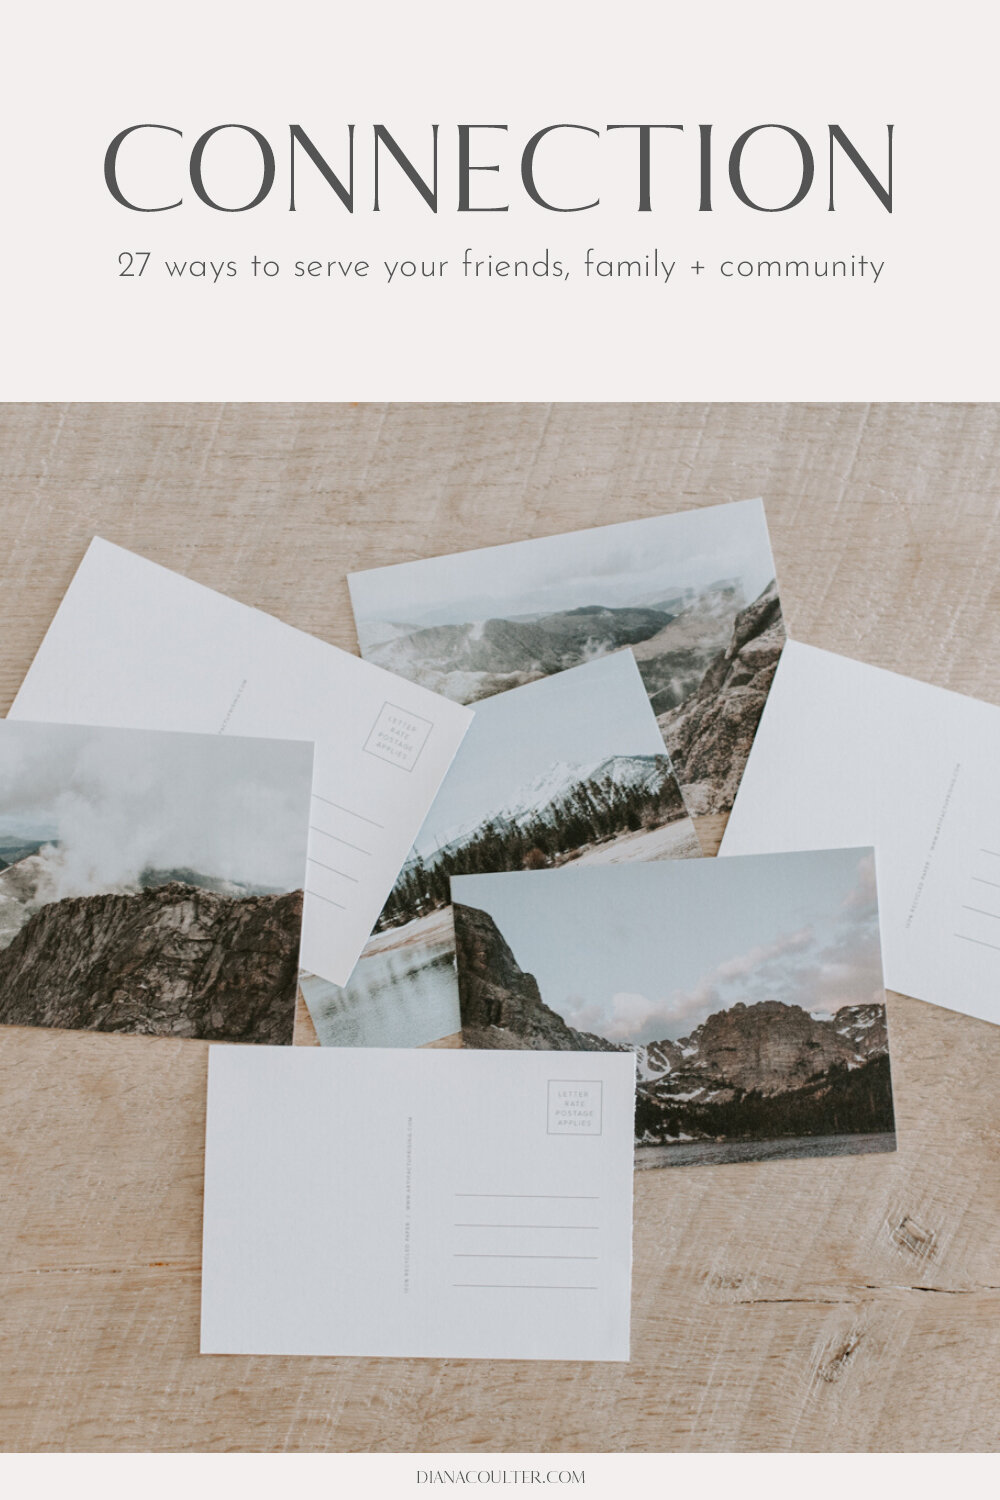 27 ways to serve your family friends and community by diana coulter.jpg